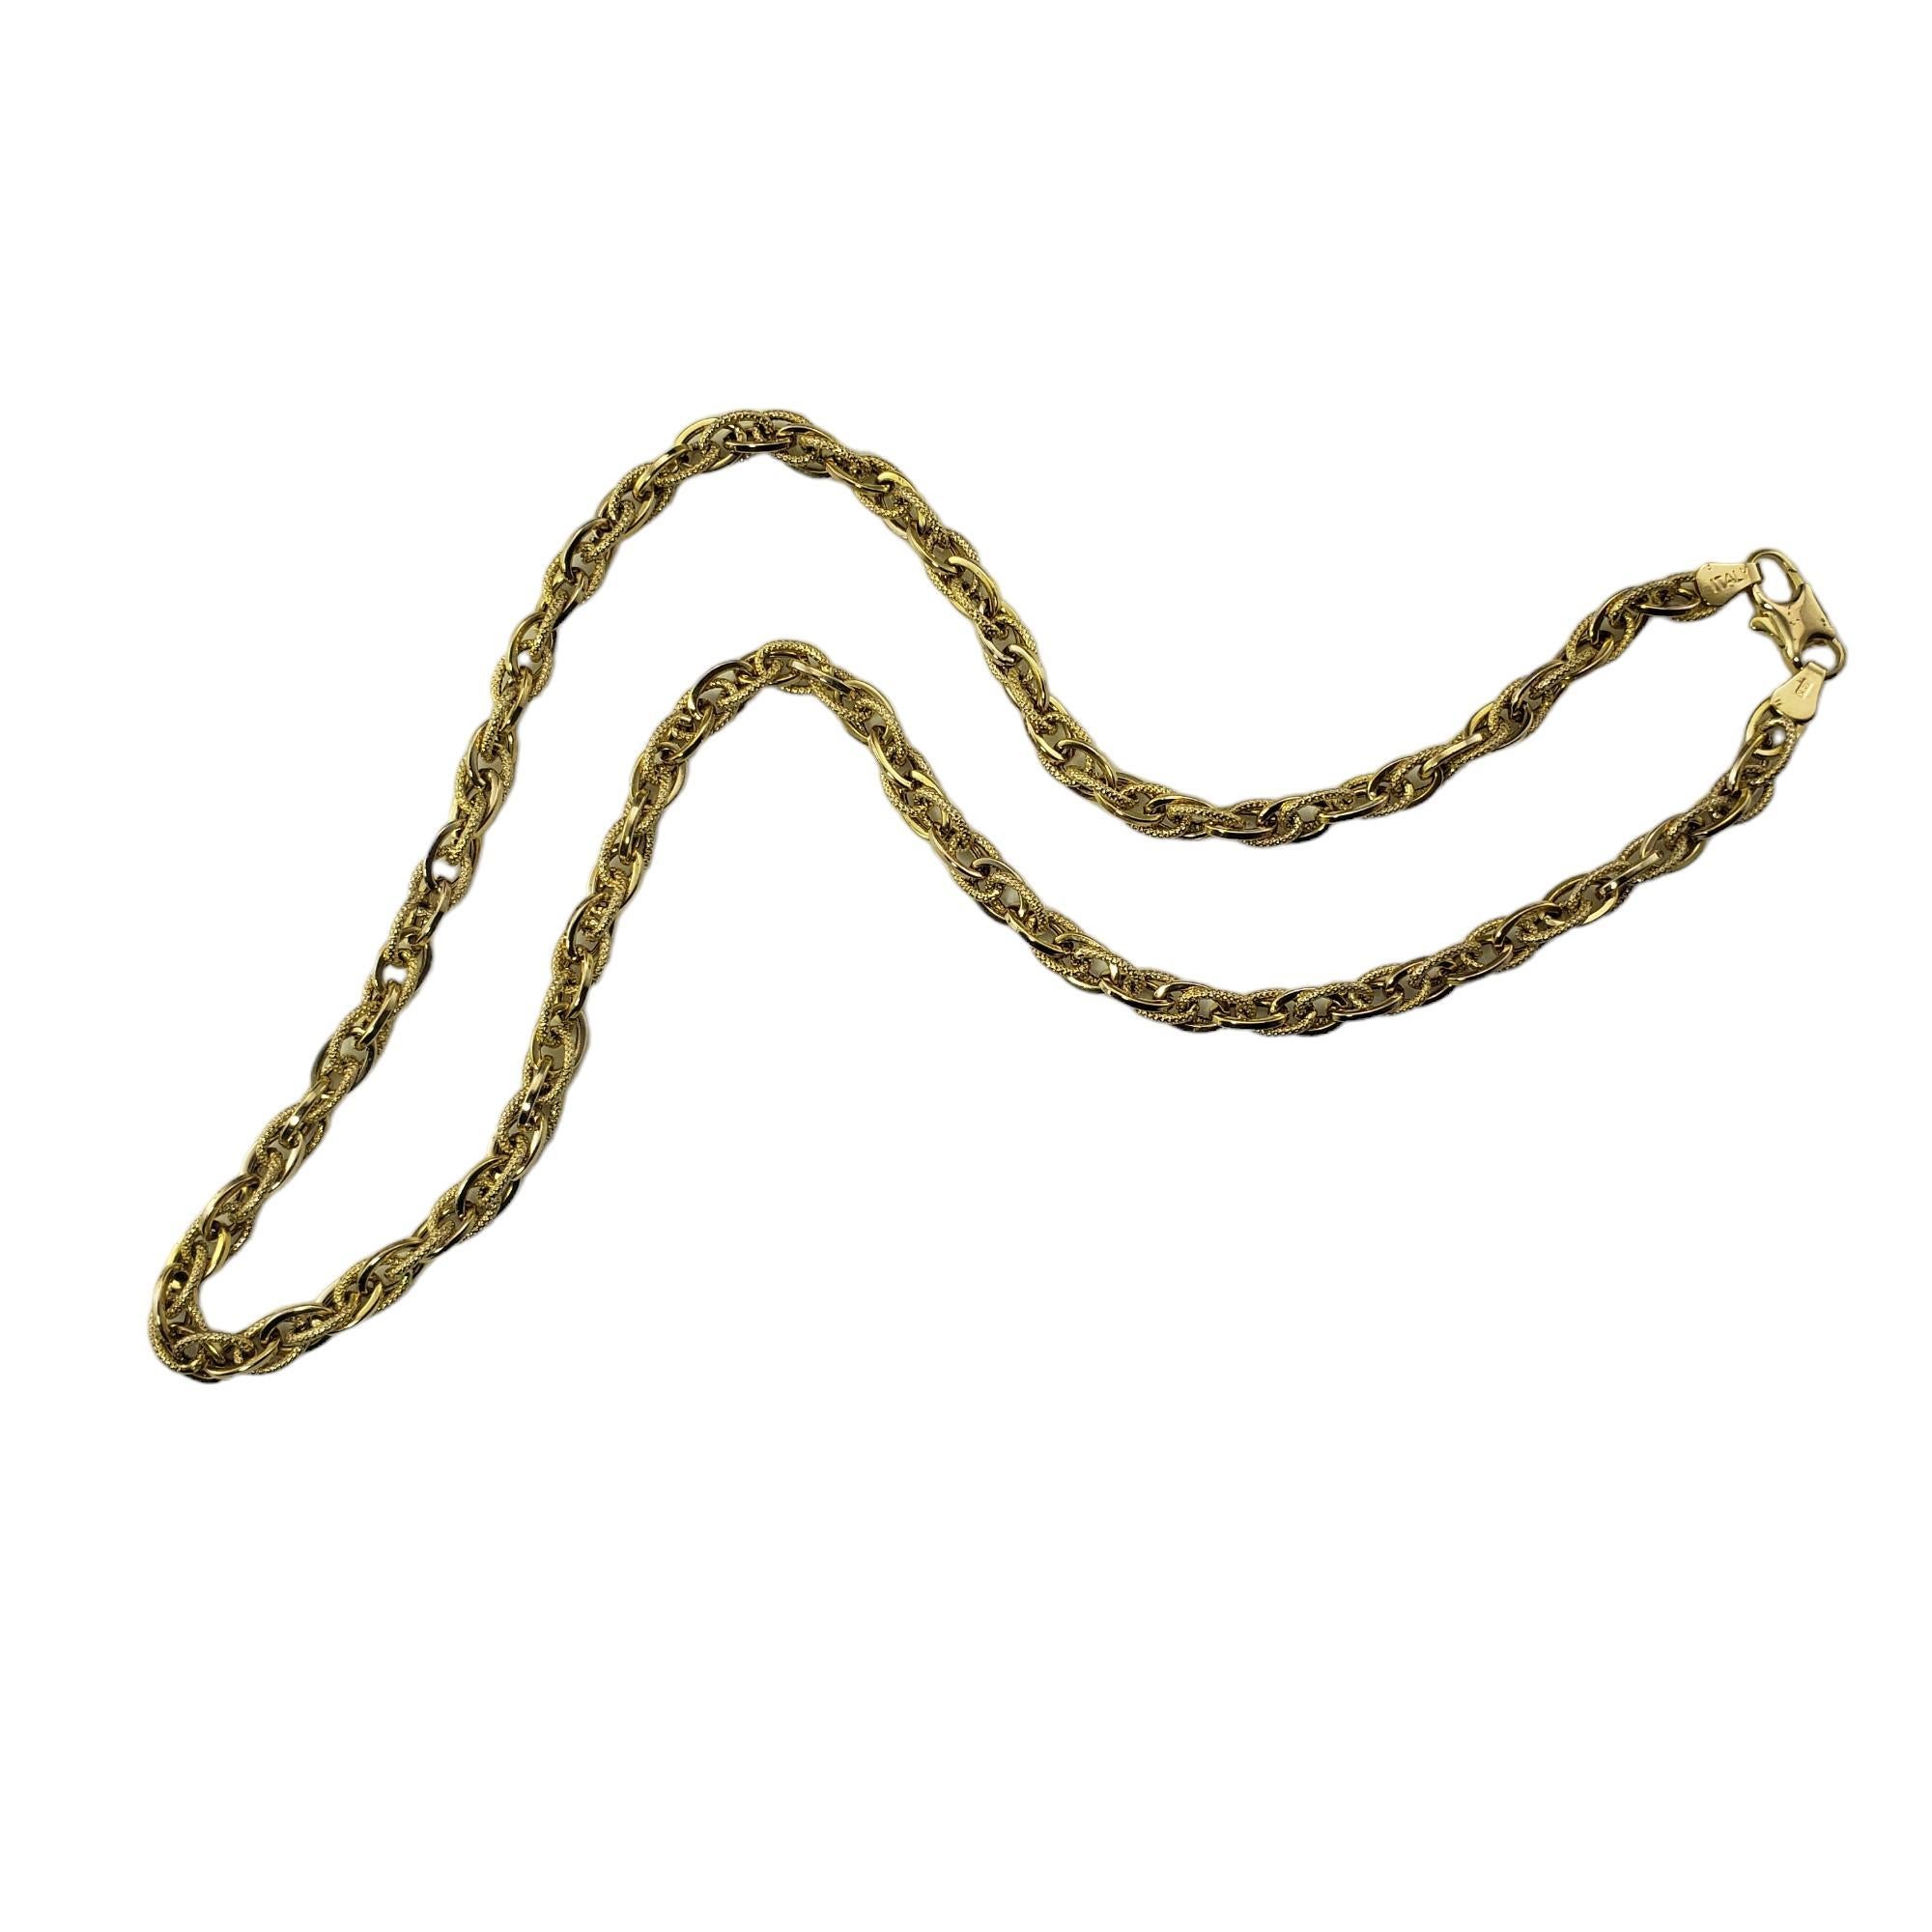 Vintage 14 Karat Yellow Gold Cable Chain Necklace-

This elegant cable chain necklace is crafted in meticulously detailed 14K yellow gold.  Width:  5 mm.

Size: 17 inches

Stamped: BREV  585

Weight: 10.0 gr./ 6.4 dwt.

Very good condition,